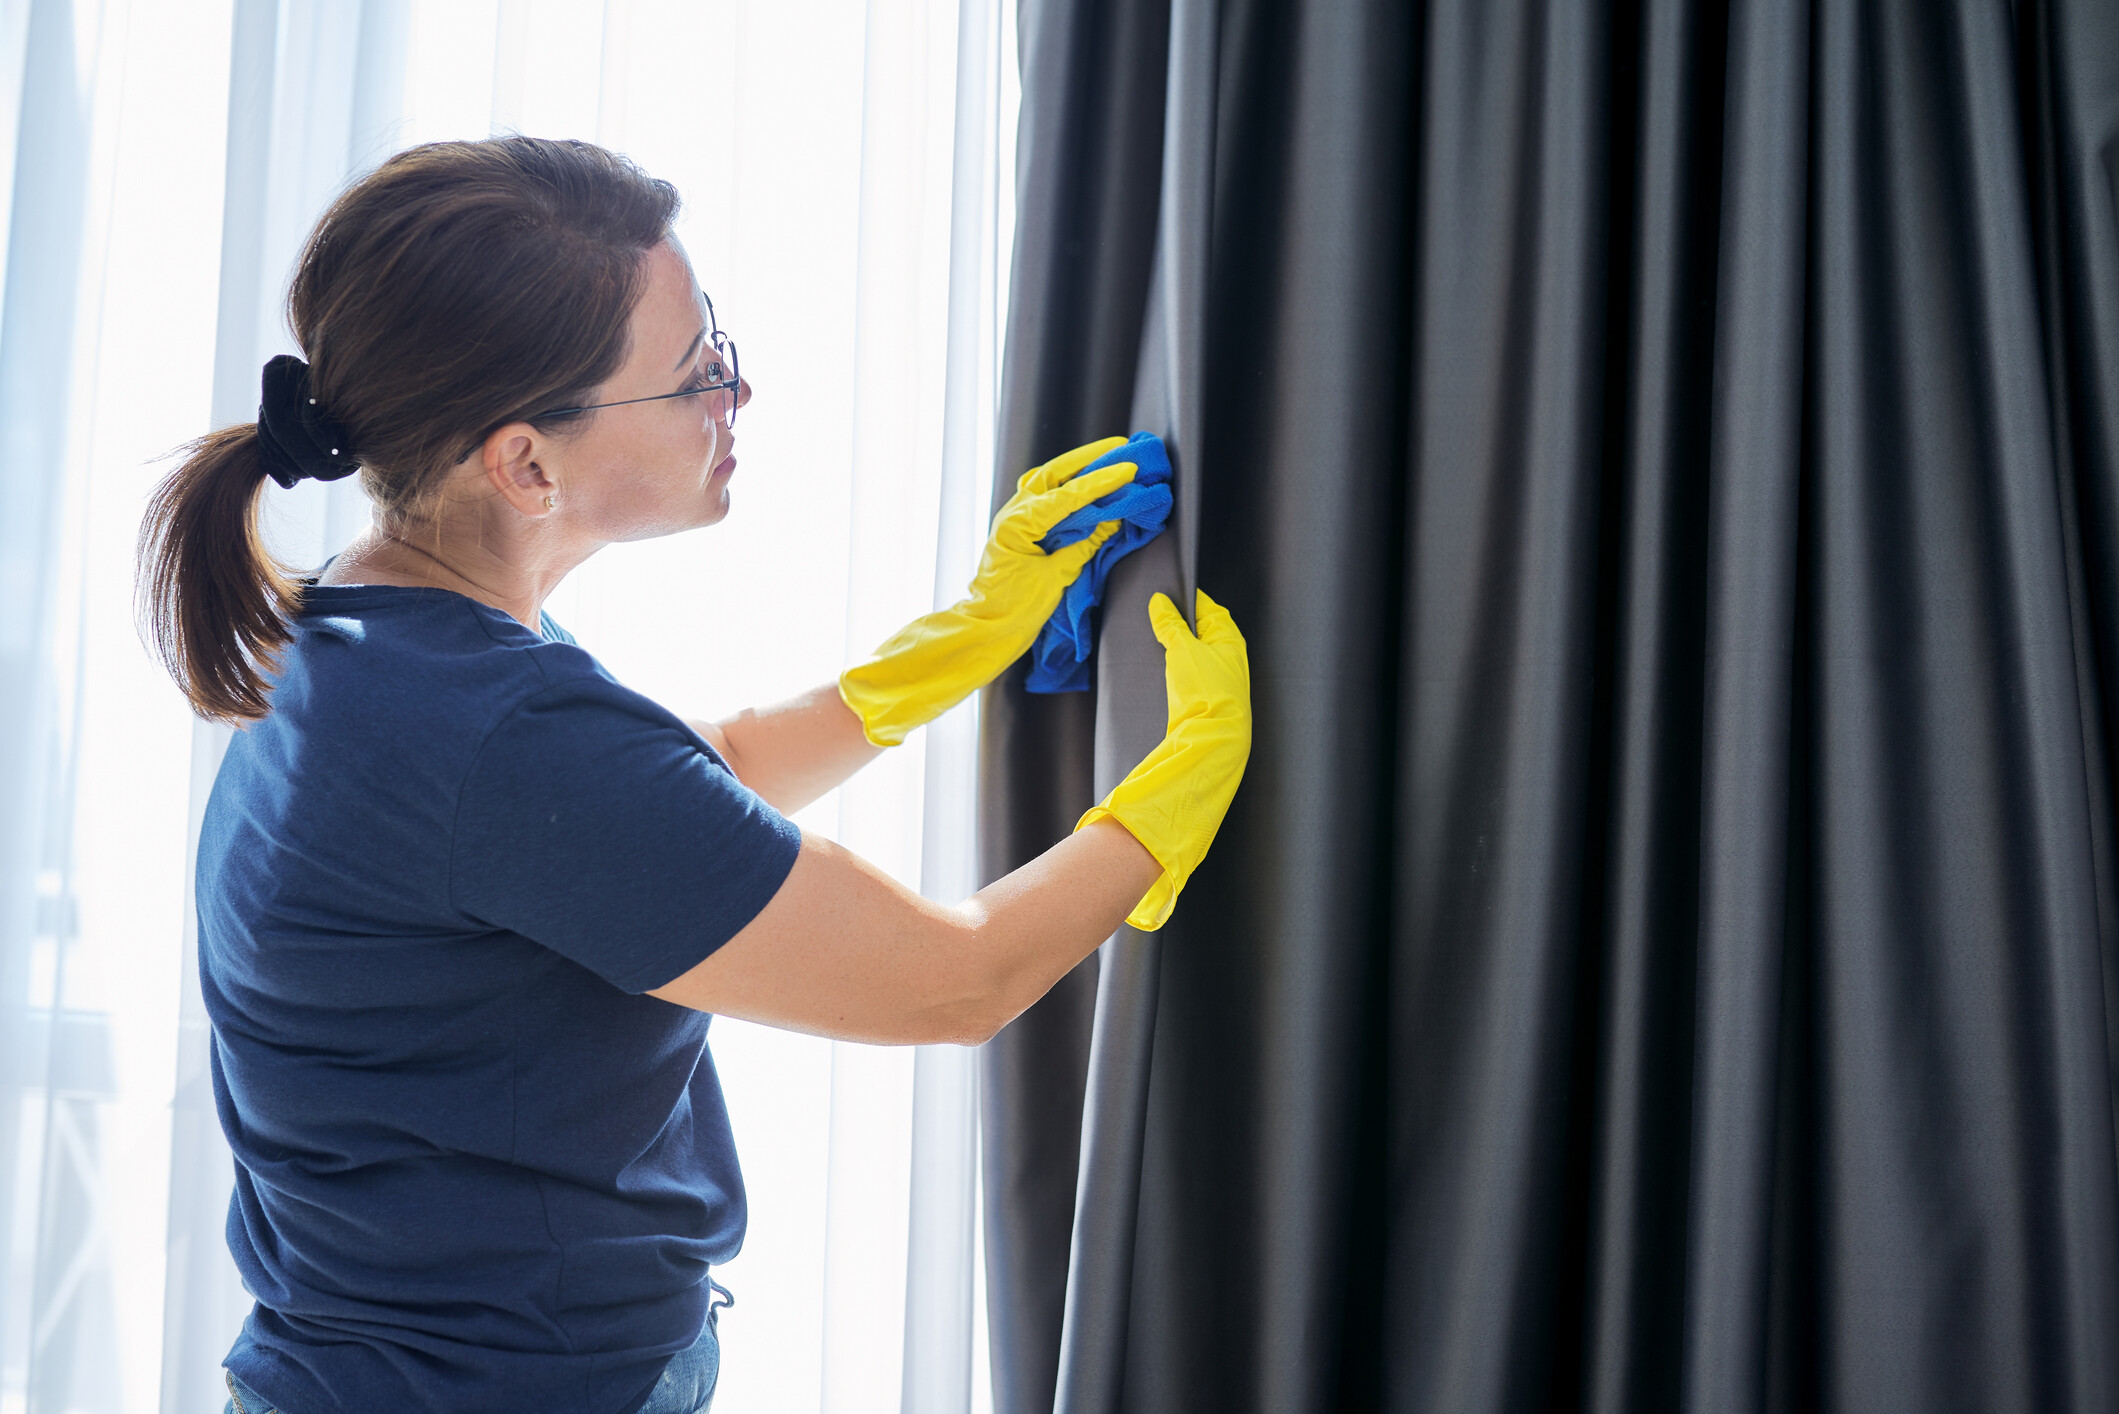 House cleaning prices for different types of cleaning services